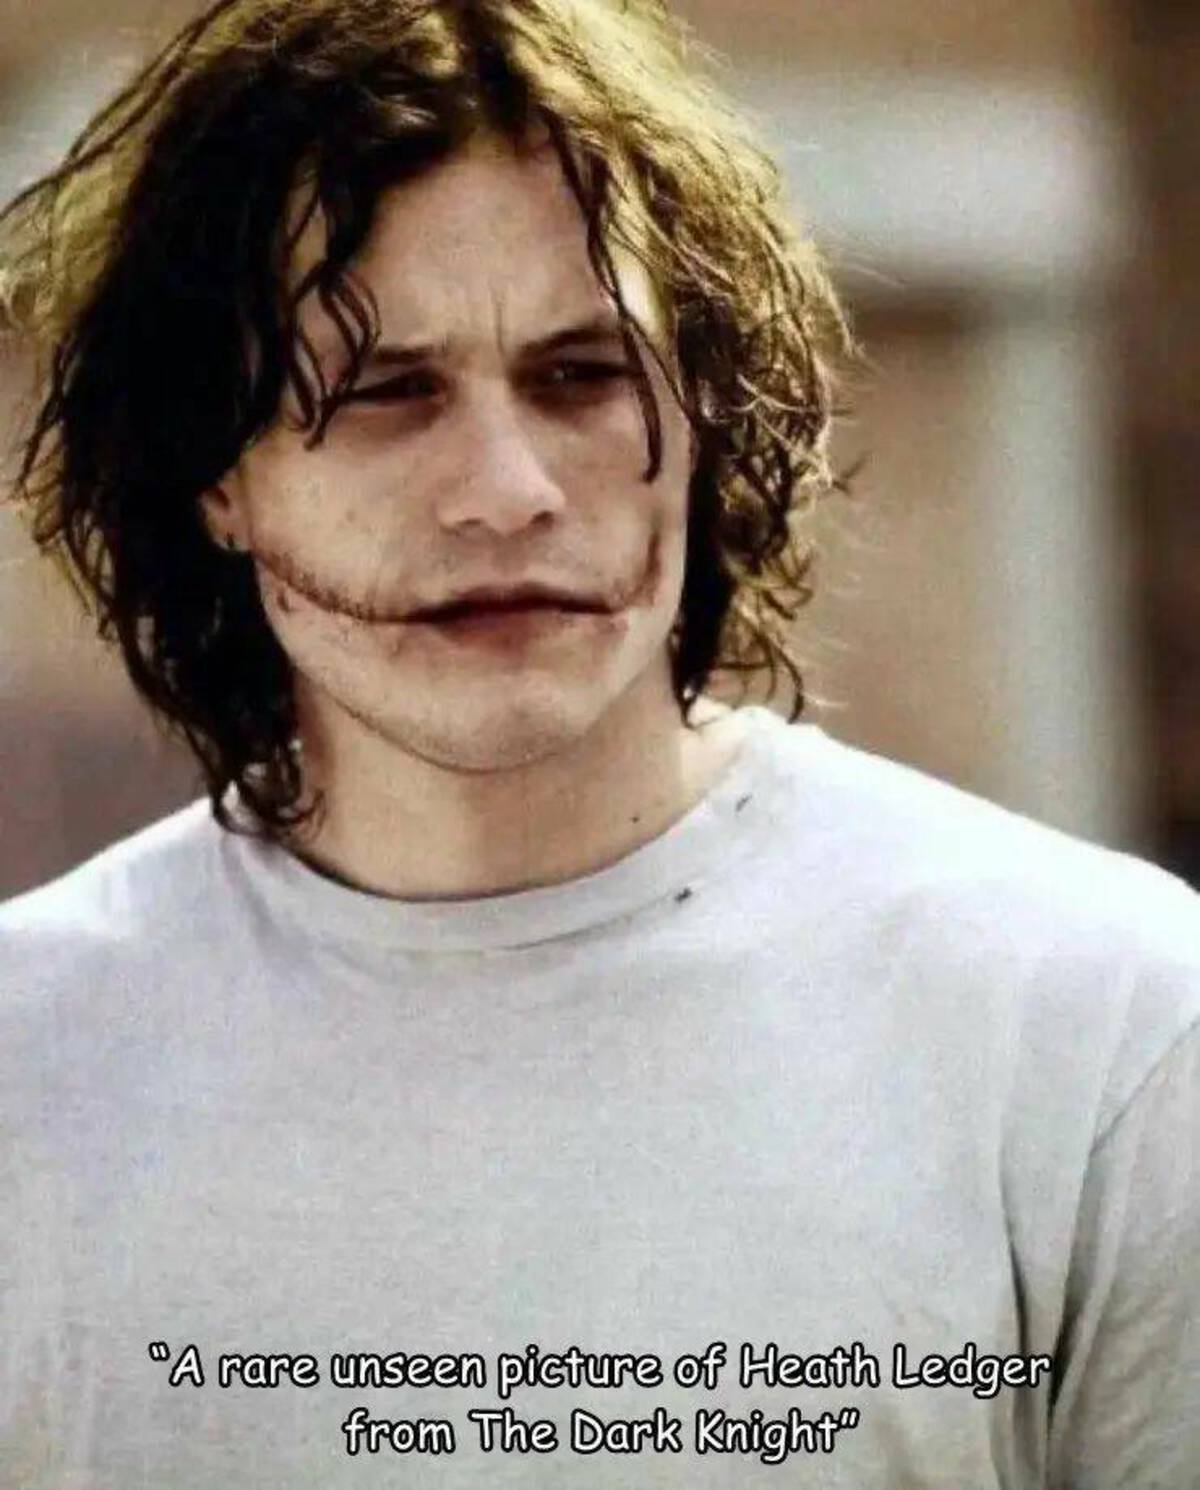 Heath Ledger - "A rare unseen picture of Heath Ledger from The Dark Knight"